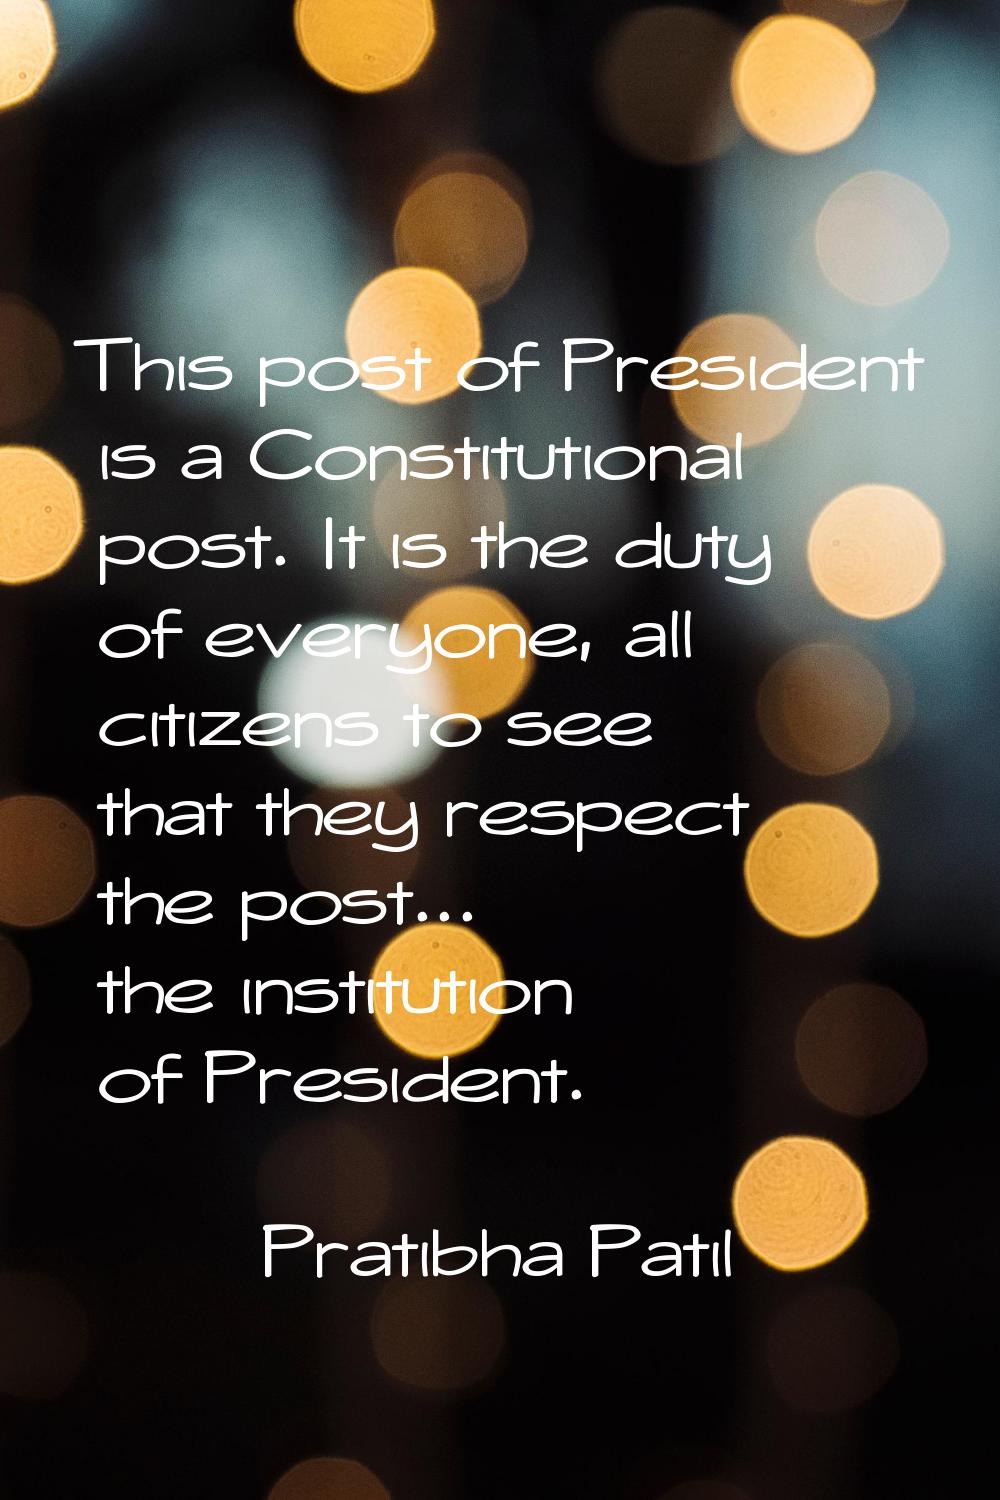 This post of President is a Constitutional post. It is the duty of everyone, all citizens to see th